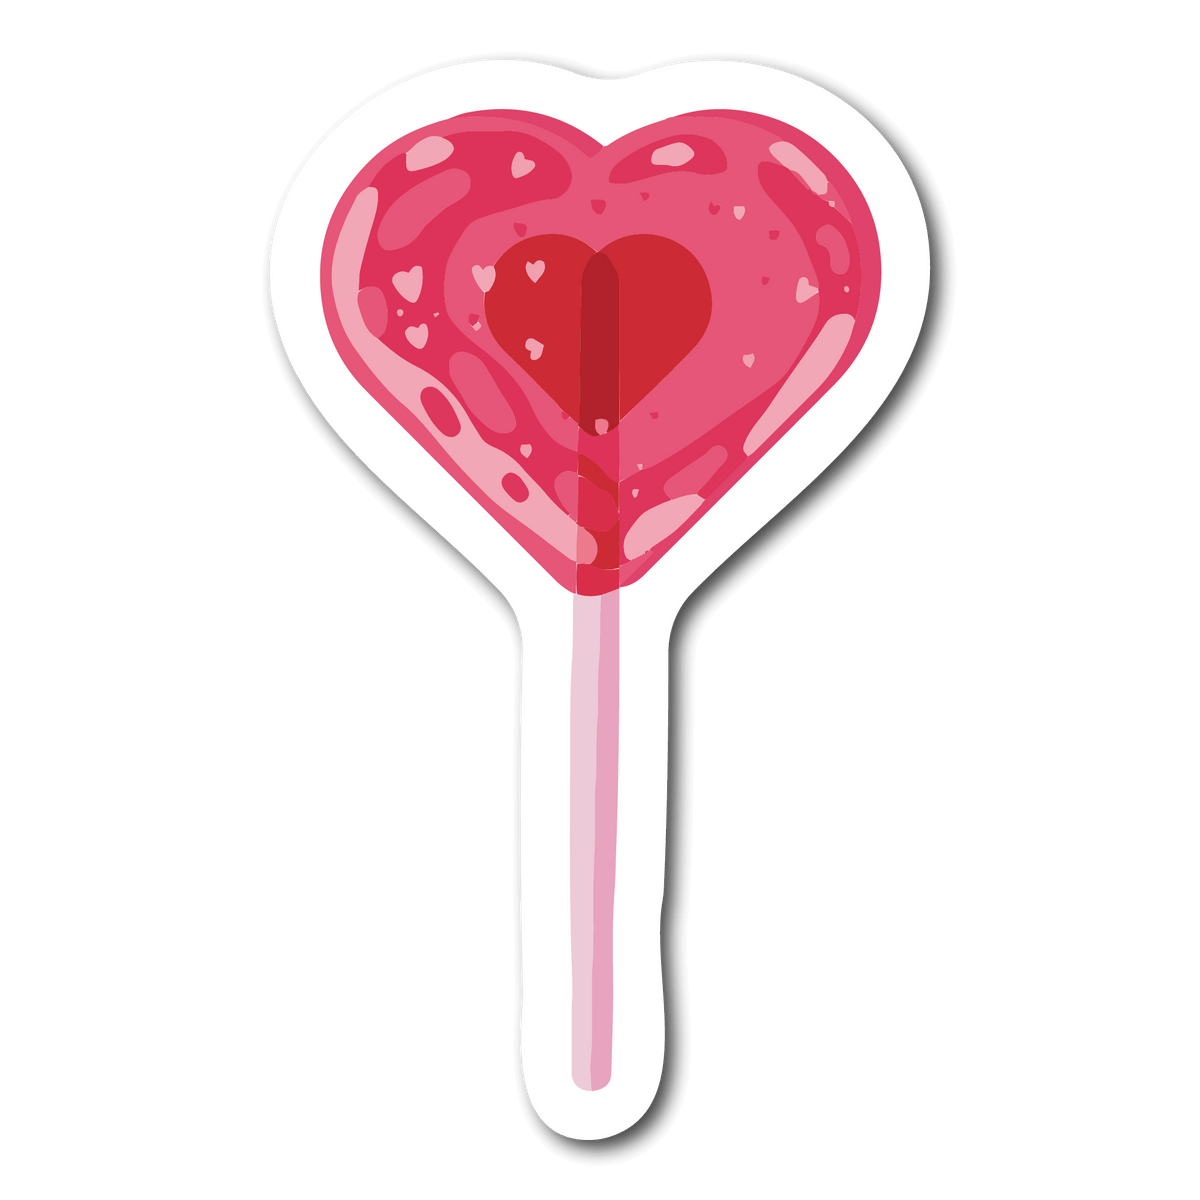 Small Sticker of a Pink Heart Shaped lollipop for phone case